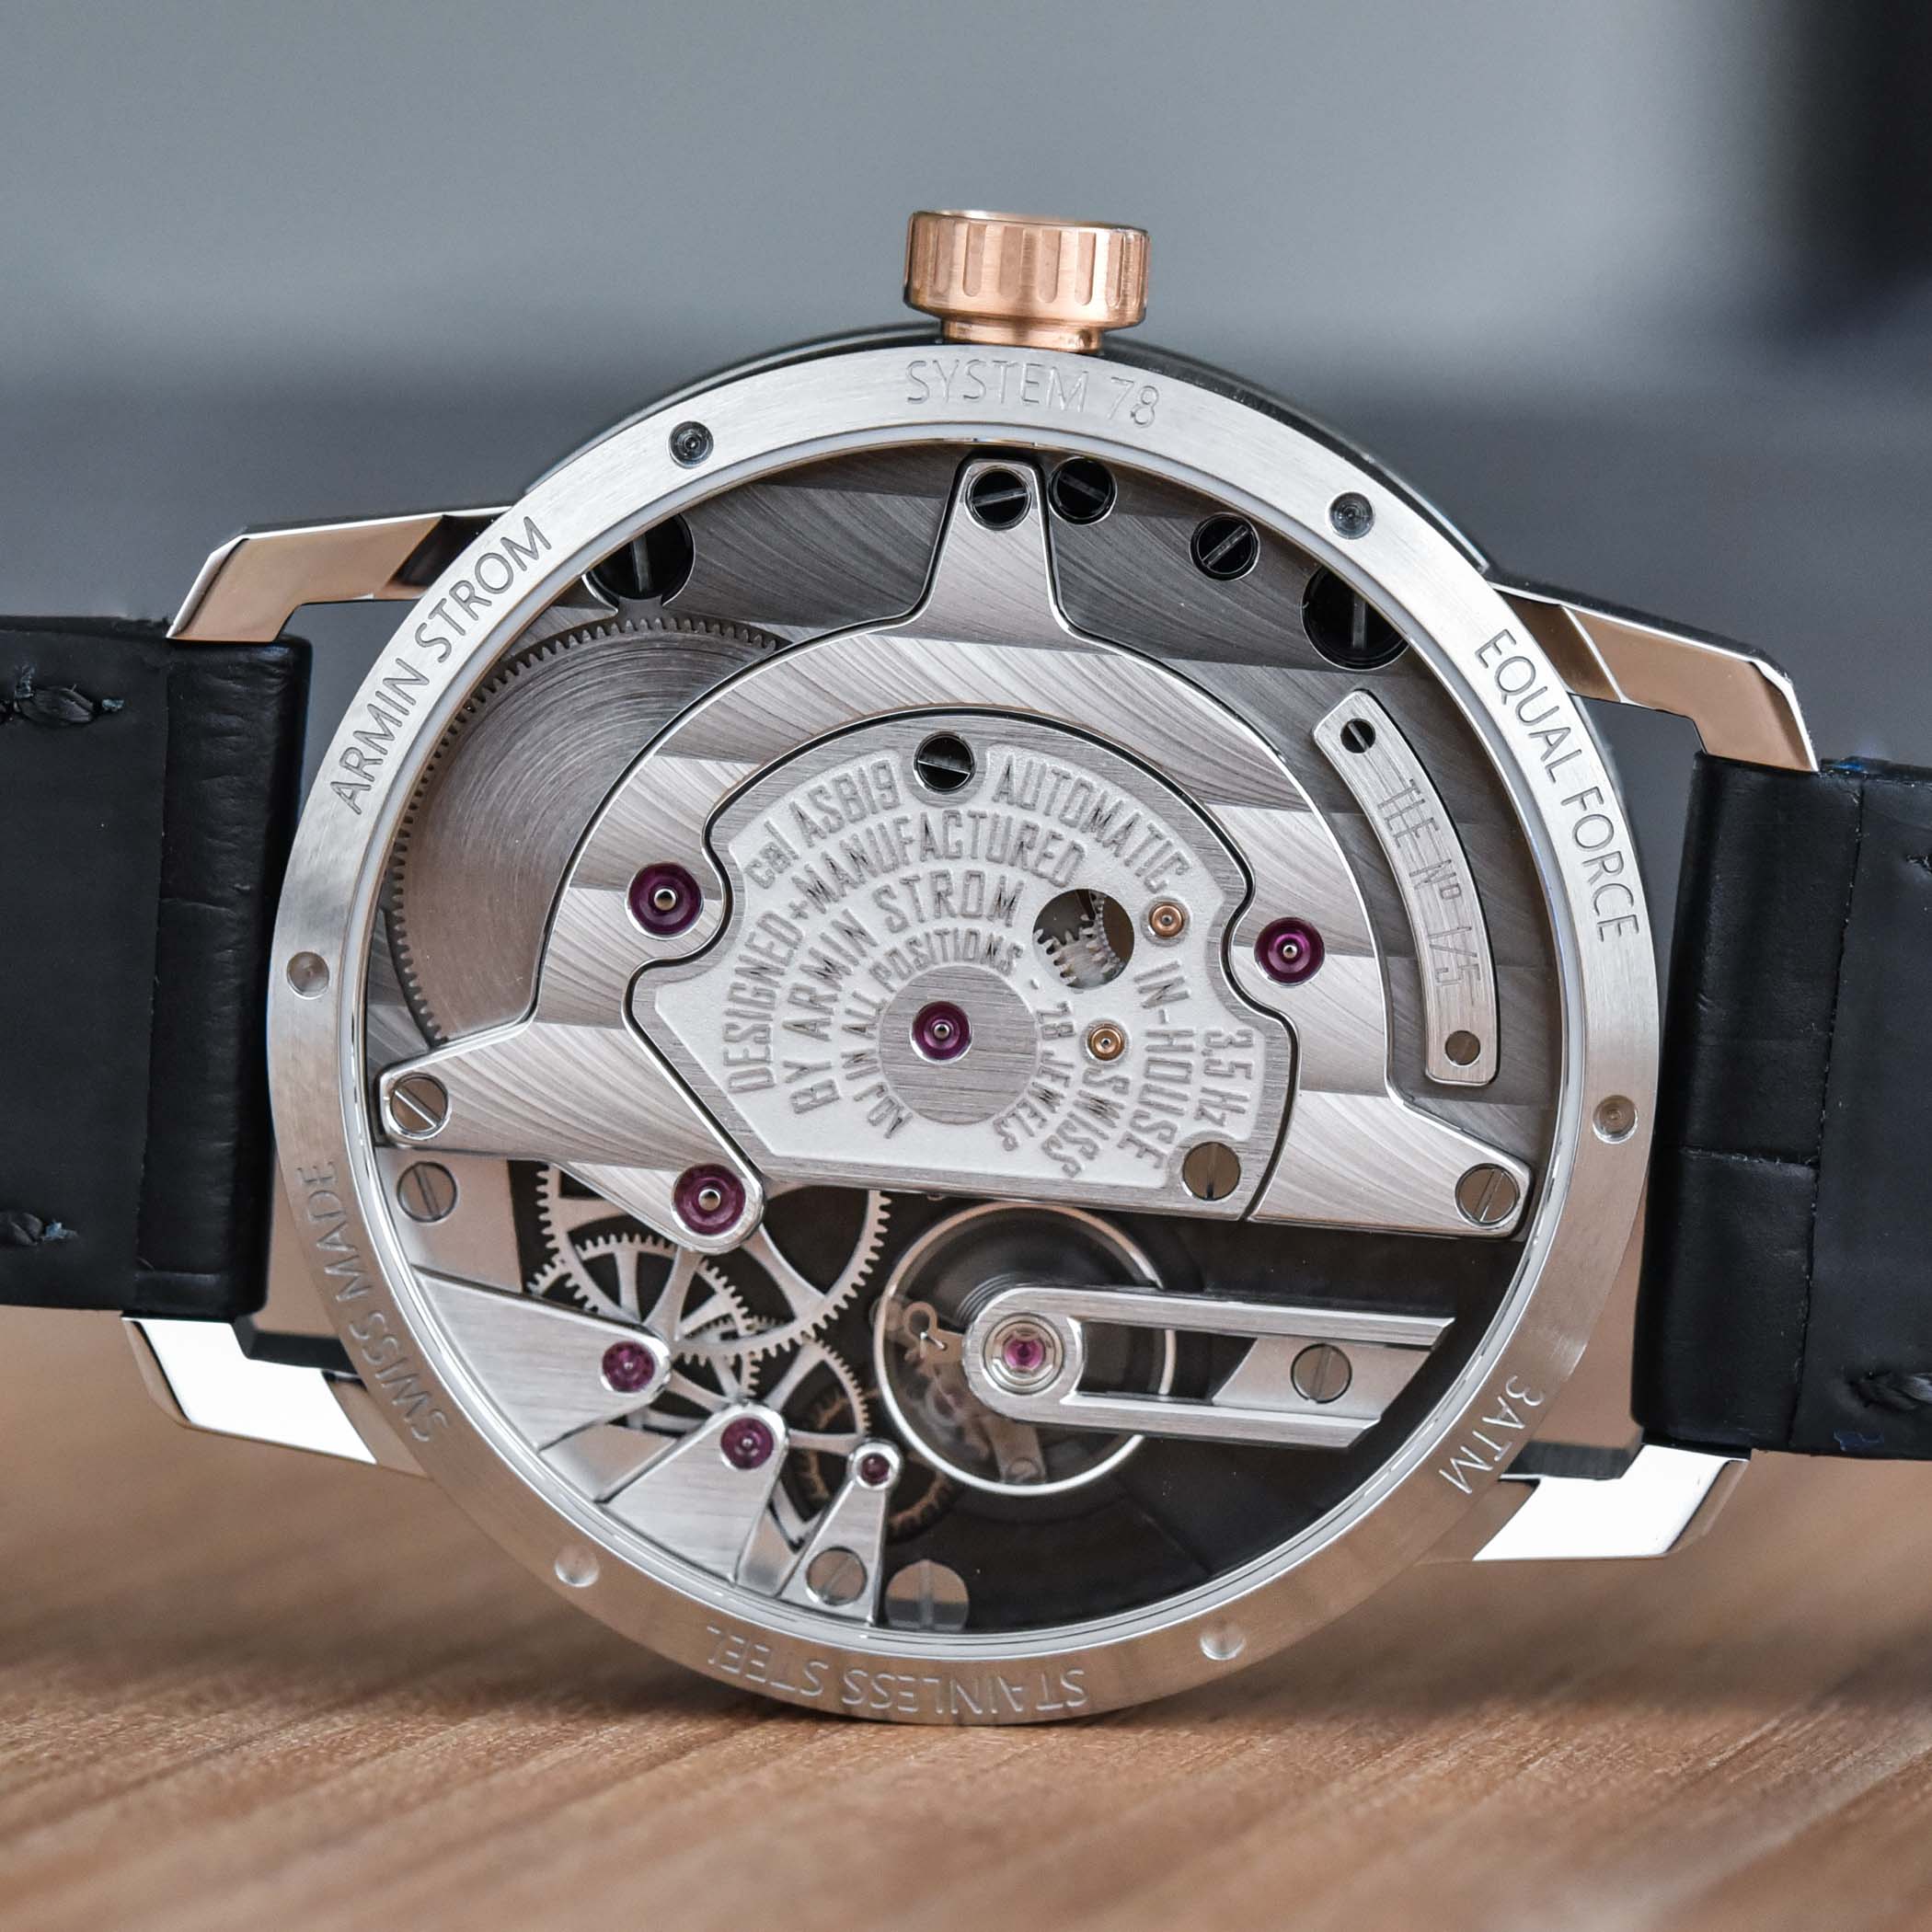 Armin Strom Gravity Equal Force The Limited Edition 5th Anniversary